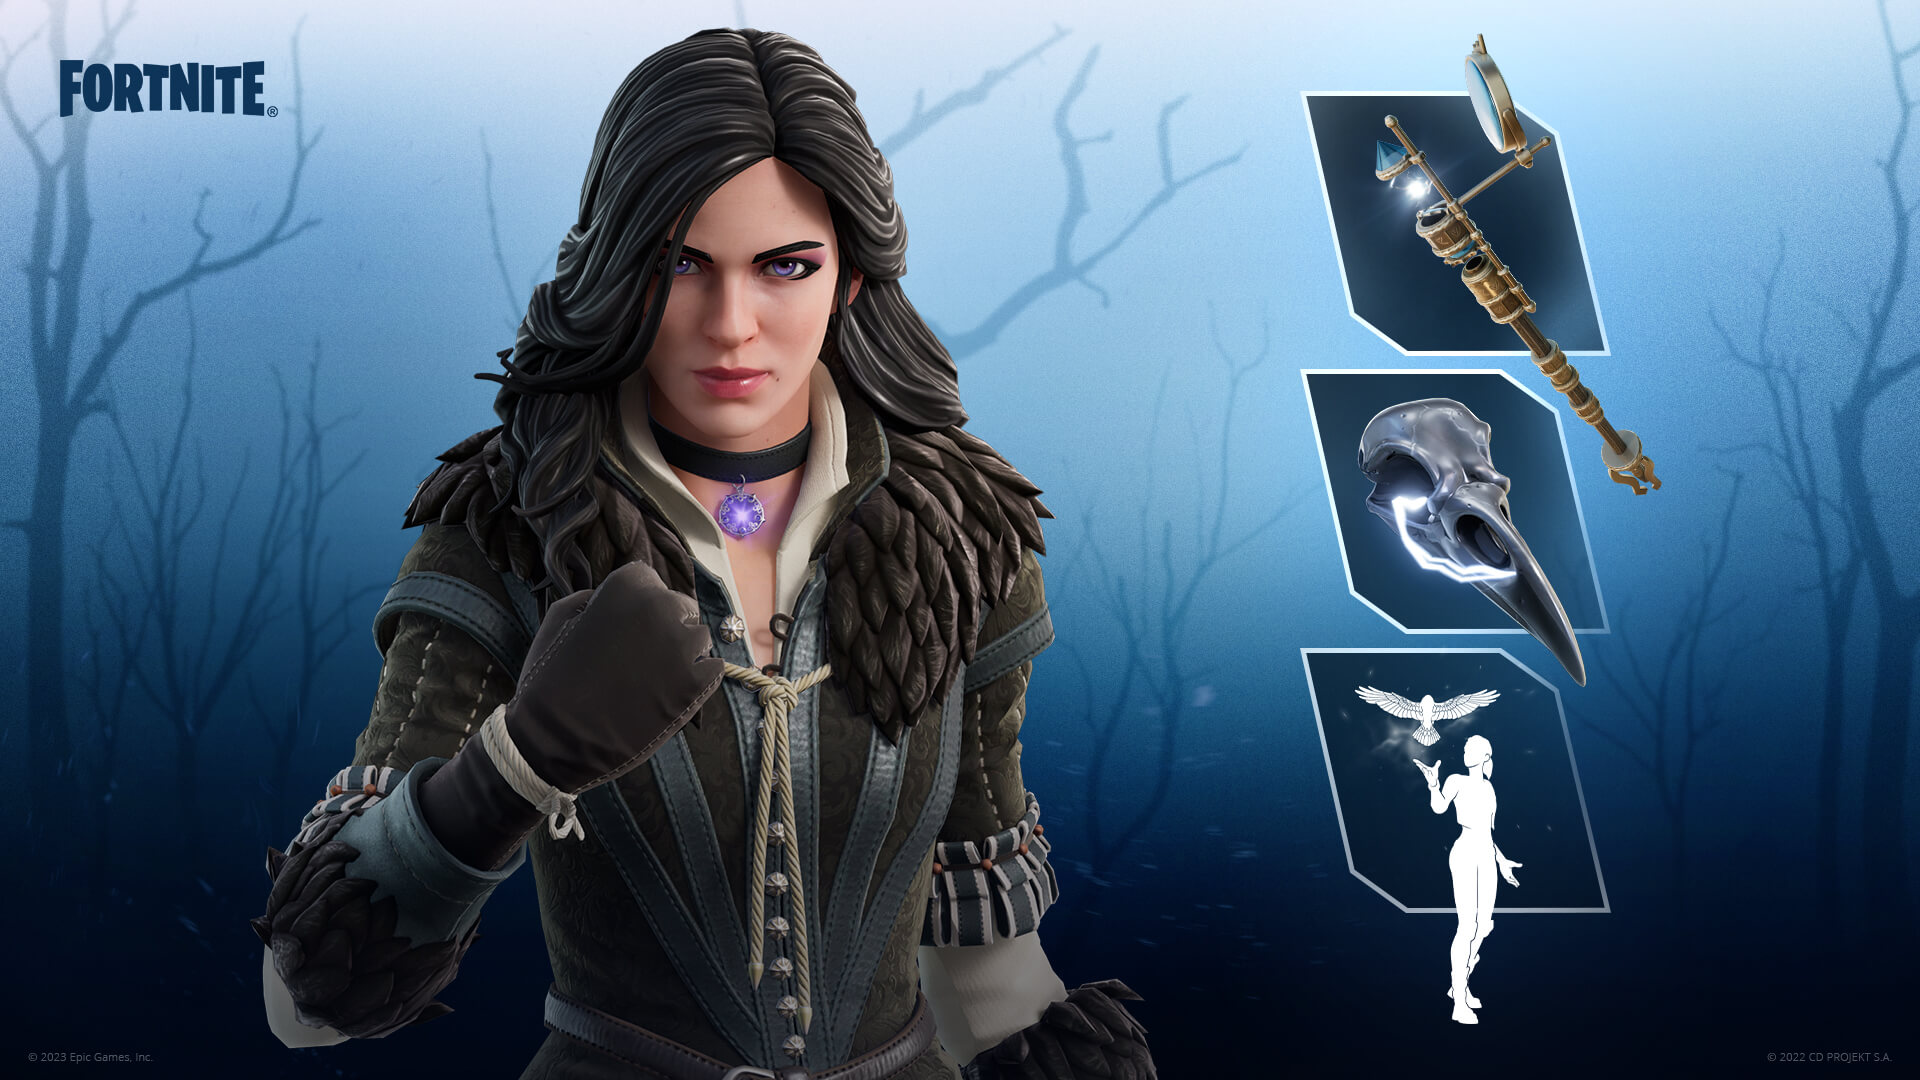 Fortnite x The Witcher: New Silver & Sorcery Set Available Now